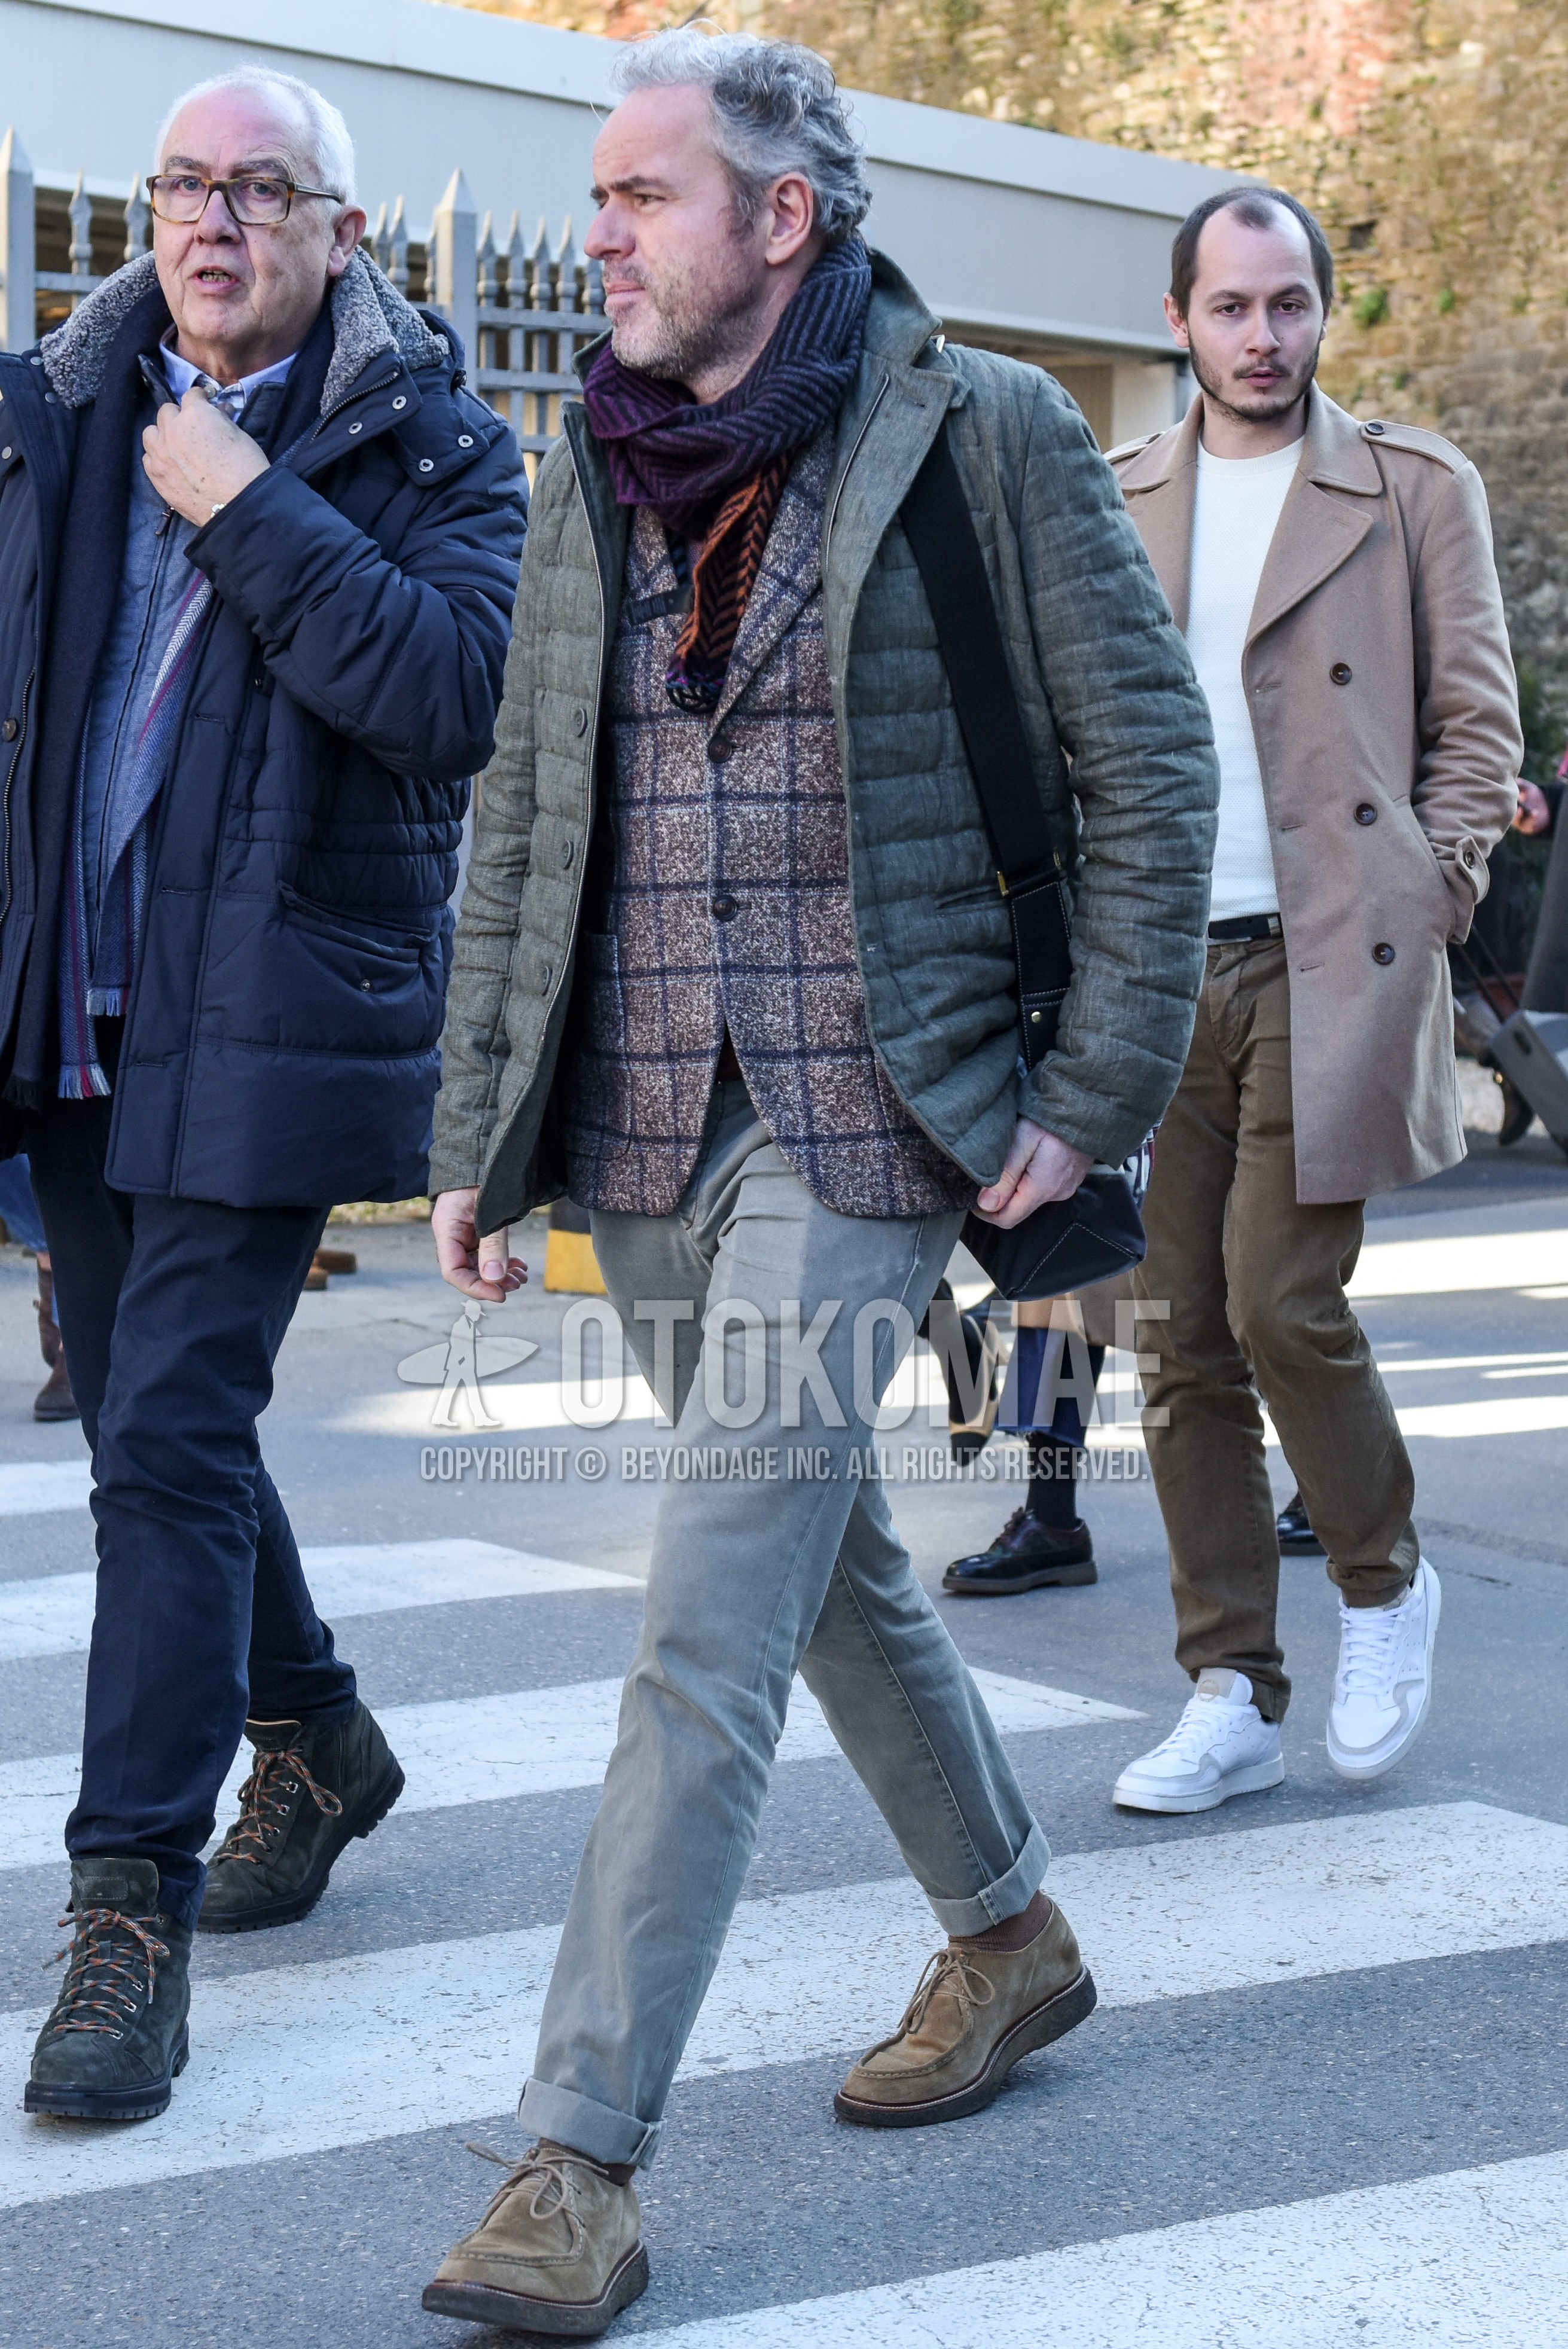 Men's autumn winter outfit with gray scarf scarf, gray plain quilted jacket, gray check tailored jacket, gray plain denim/jeans, beige plain socks, beige u-tip shoes leather shoes.